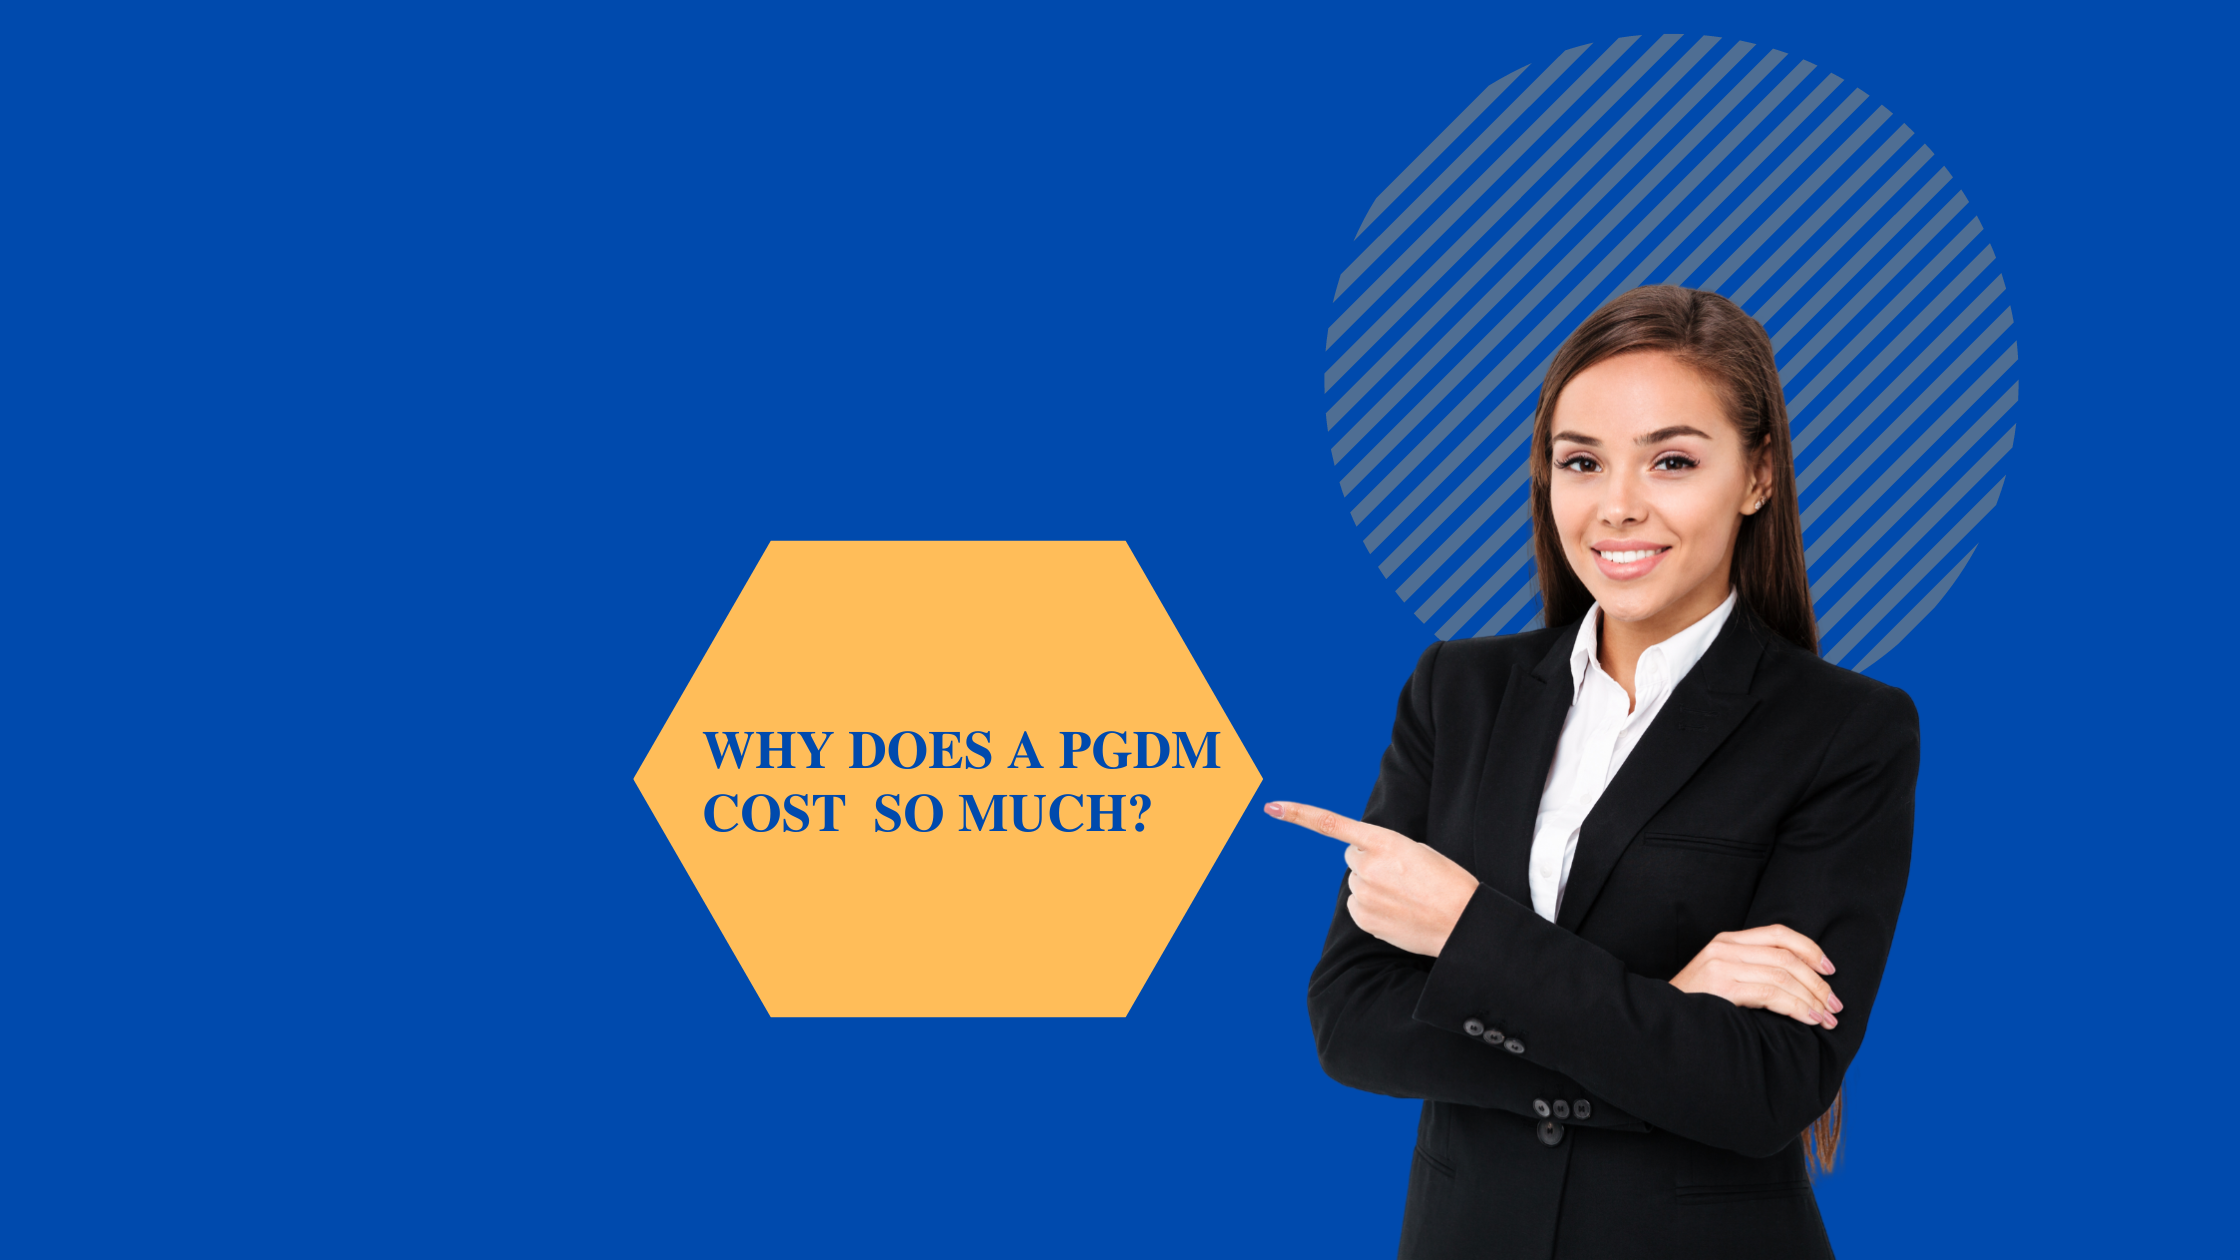 Why Does A PGDM Cost So Much?